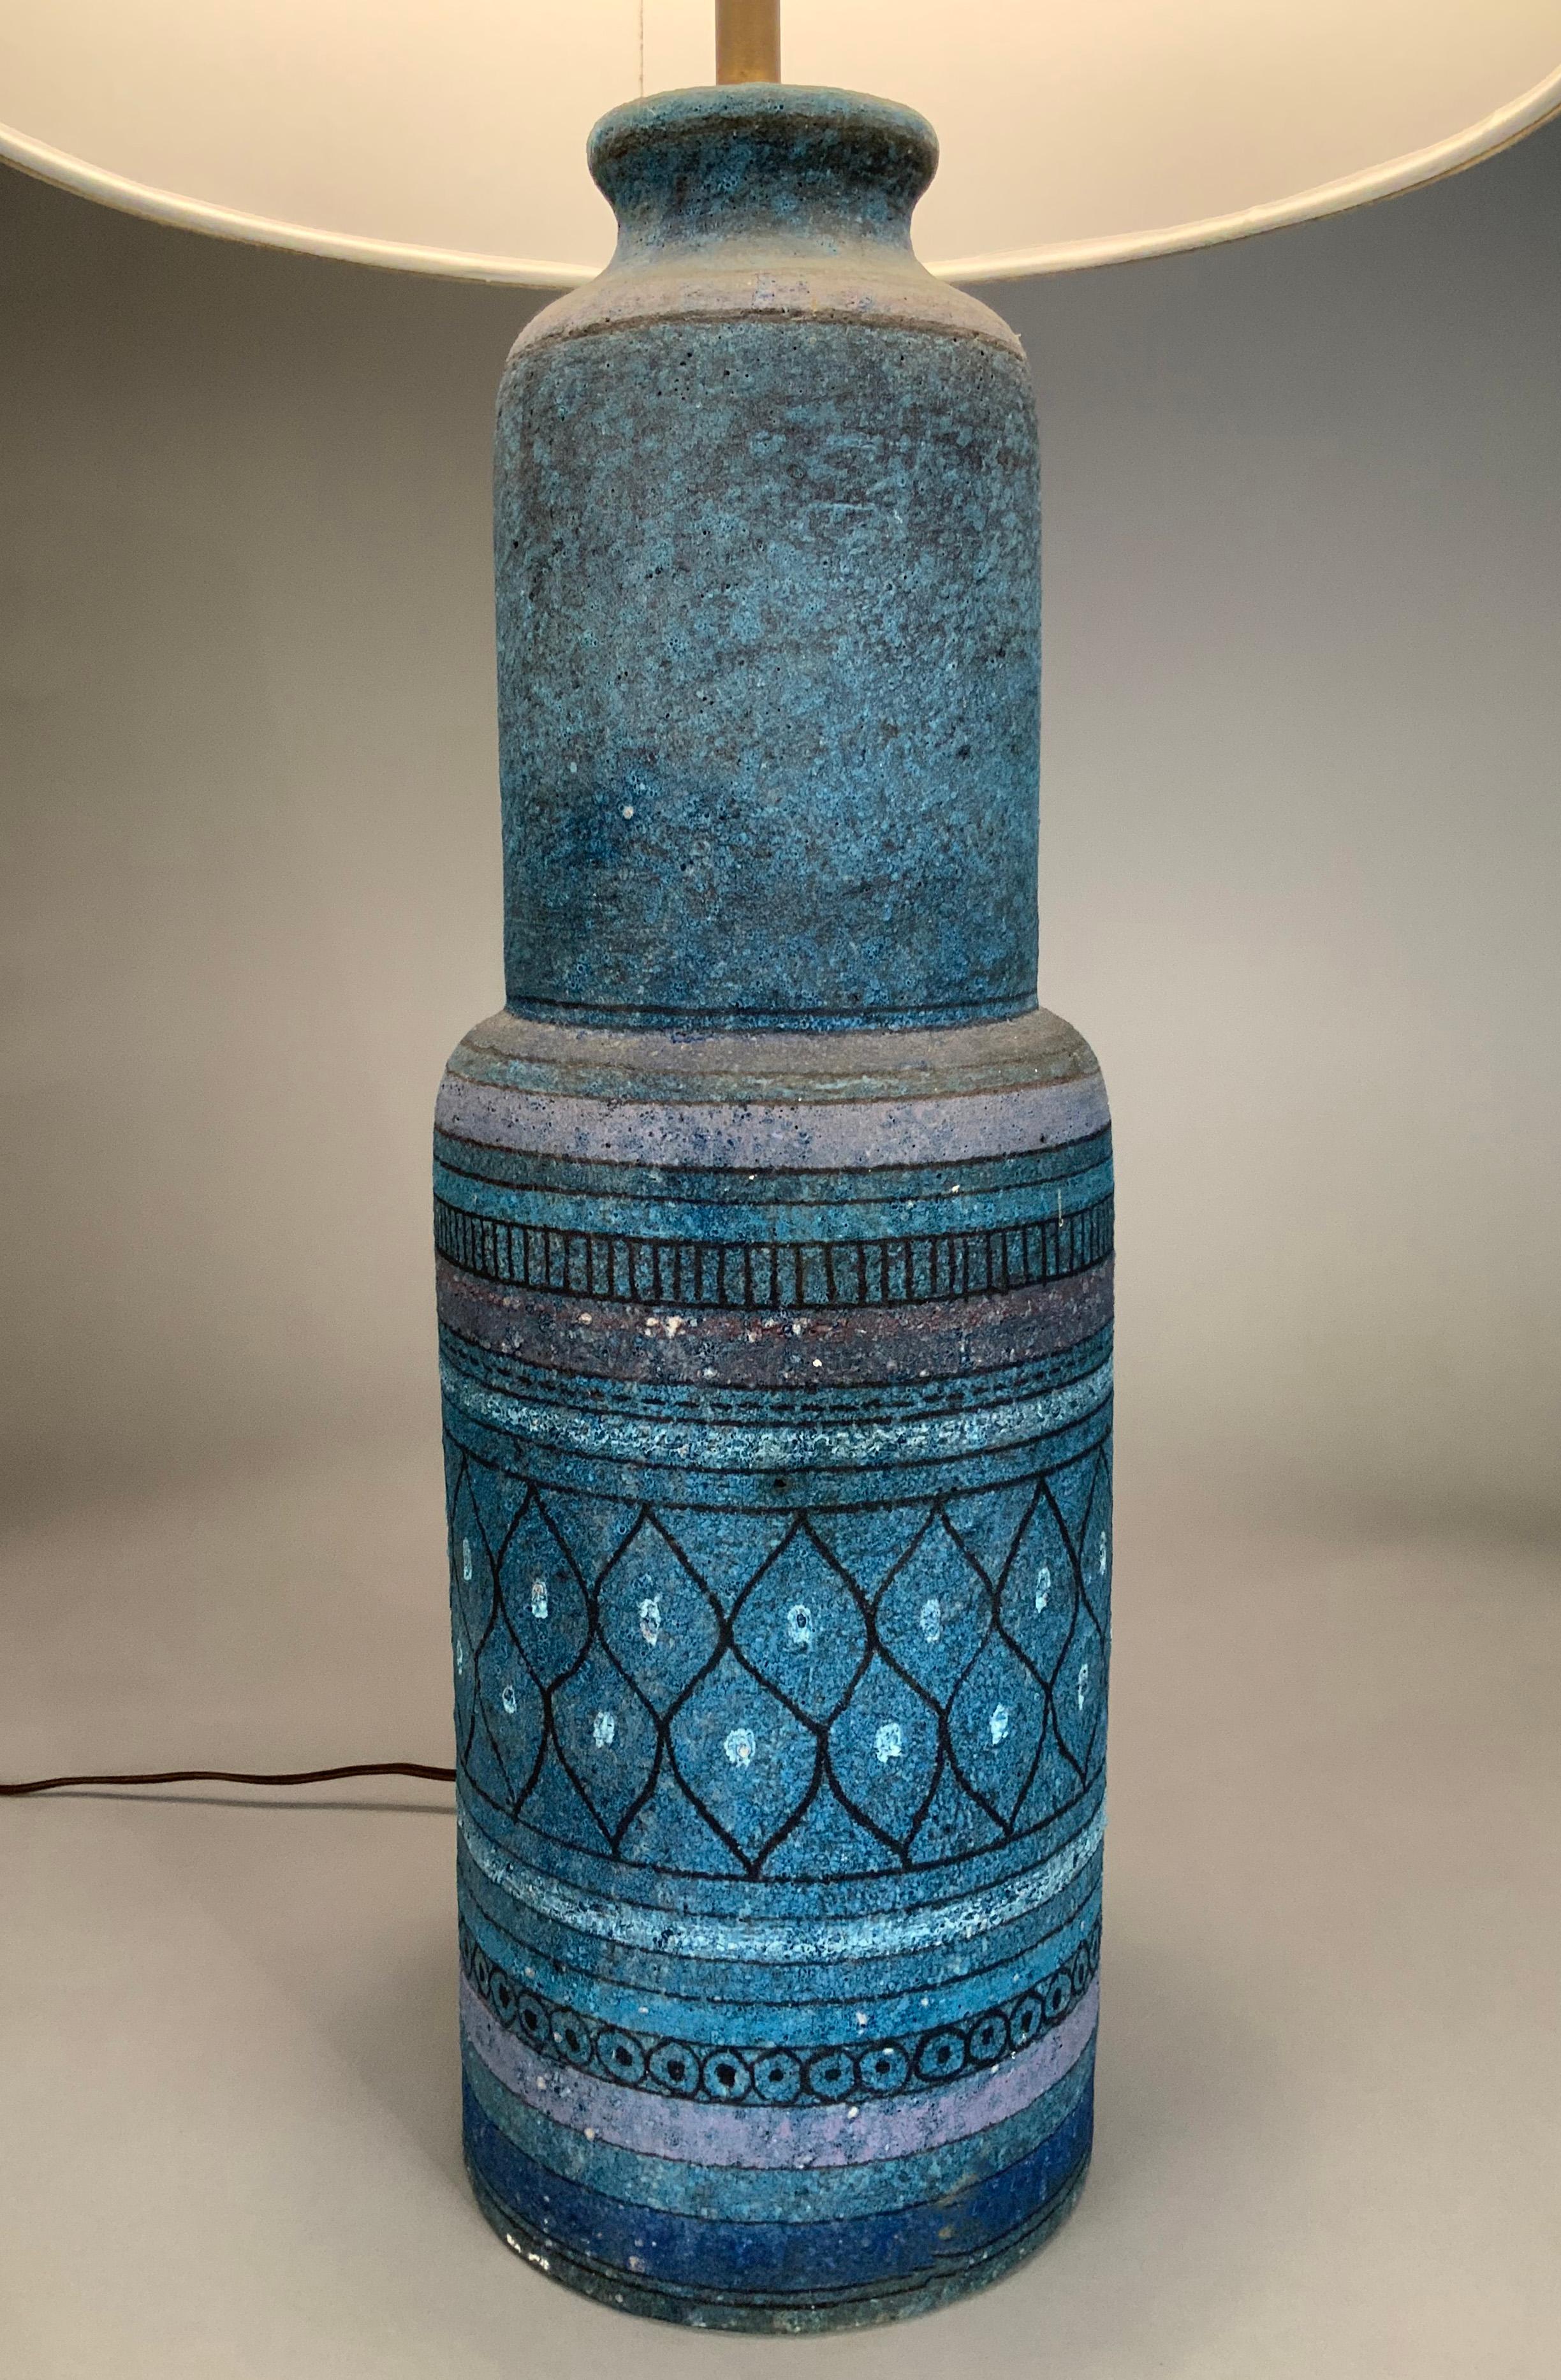 A tall and very handsome 1950's Italian ceramic lamp, with incised geometric patterns, and a matte finish glaze in shades of blue, and details in black. along with a new sand colored lampshade. base is marked Made in Italy.